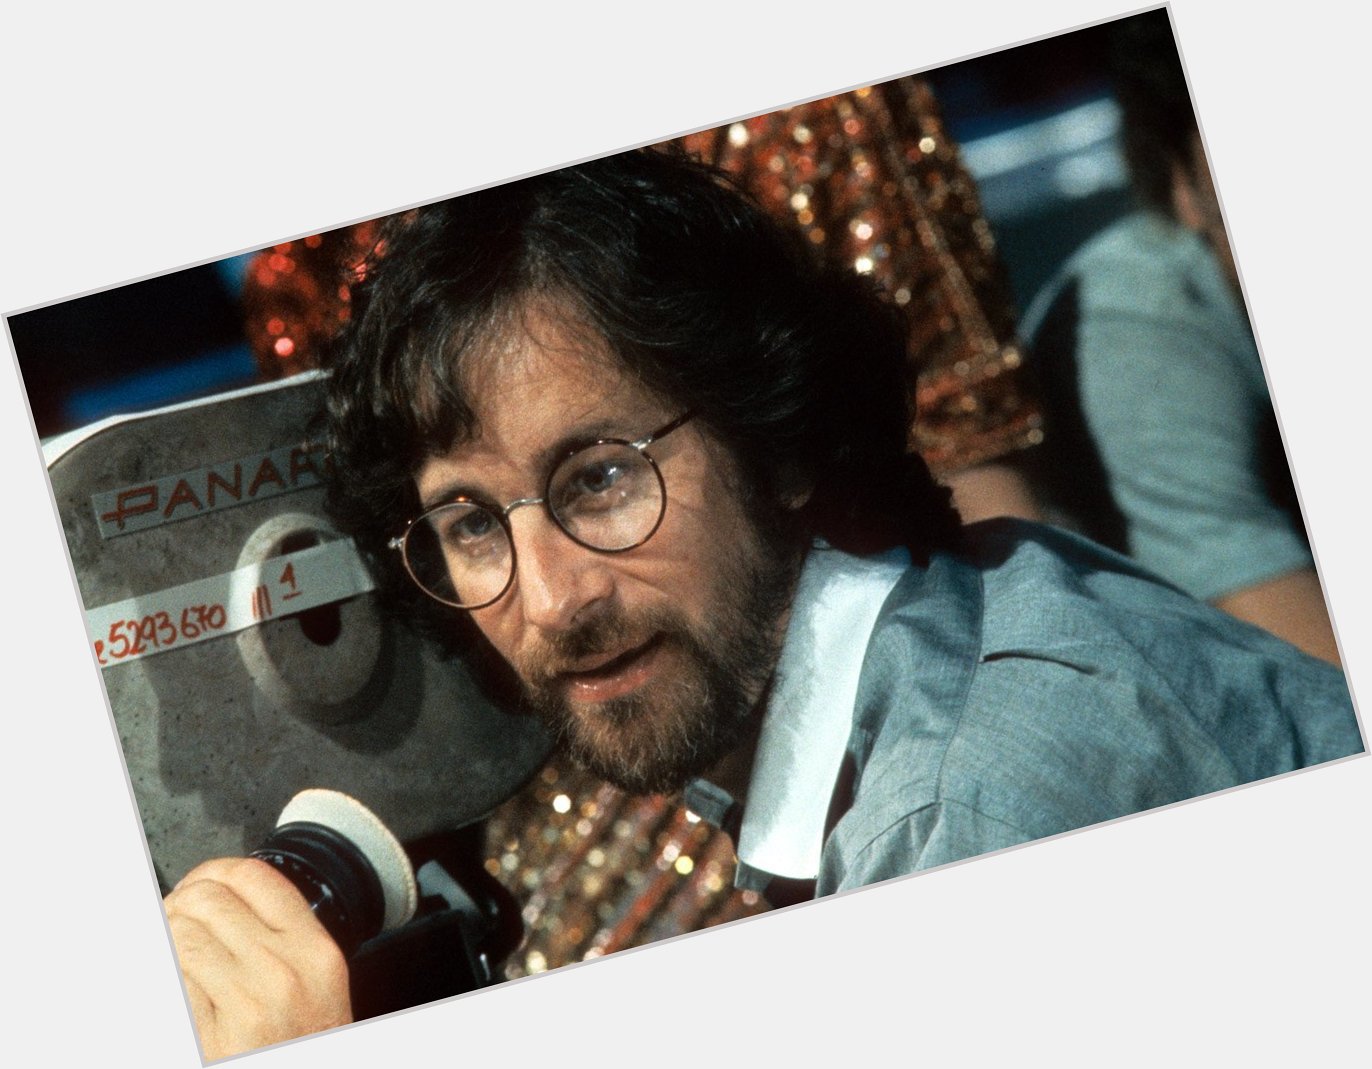 Happy 75th birthday to one of the greatest movie directors of all time in Steven Spielberg. 